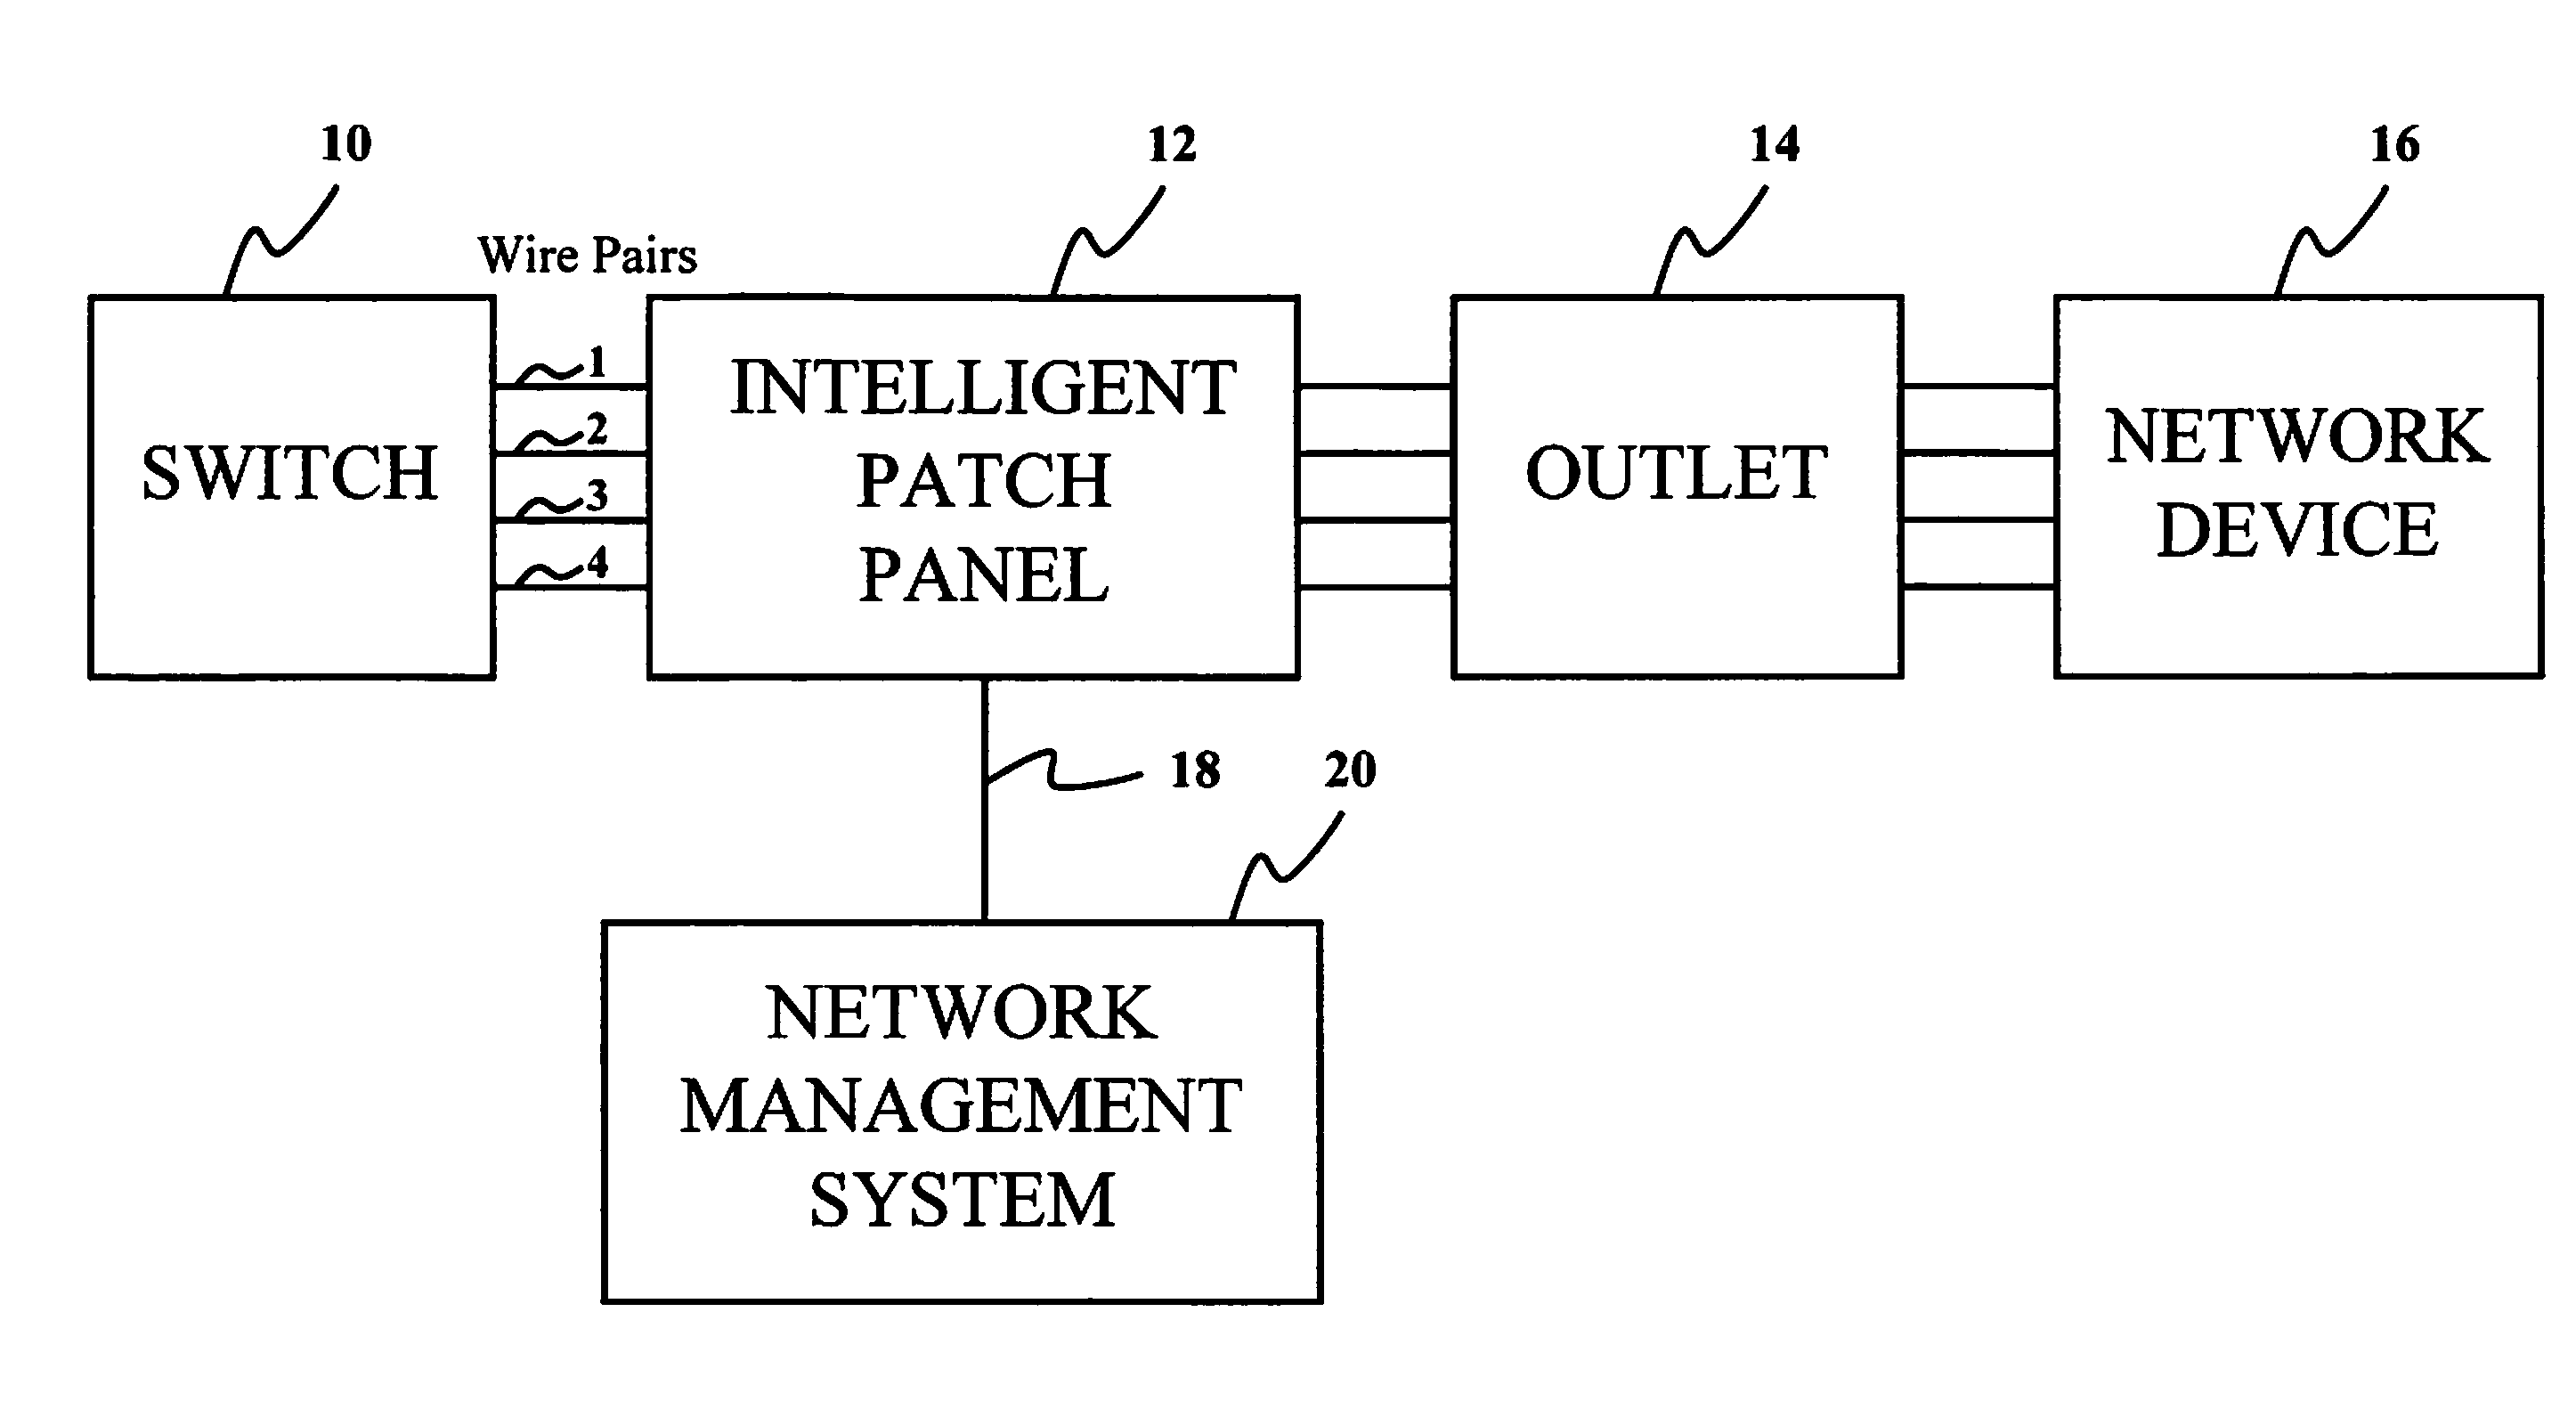 Communication outlet identification system using ethernet signals